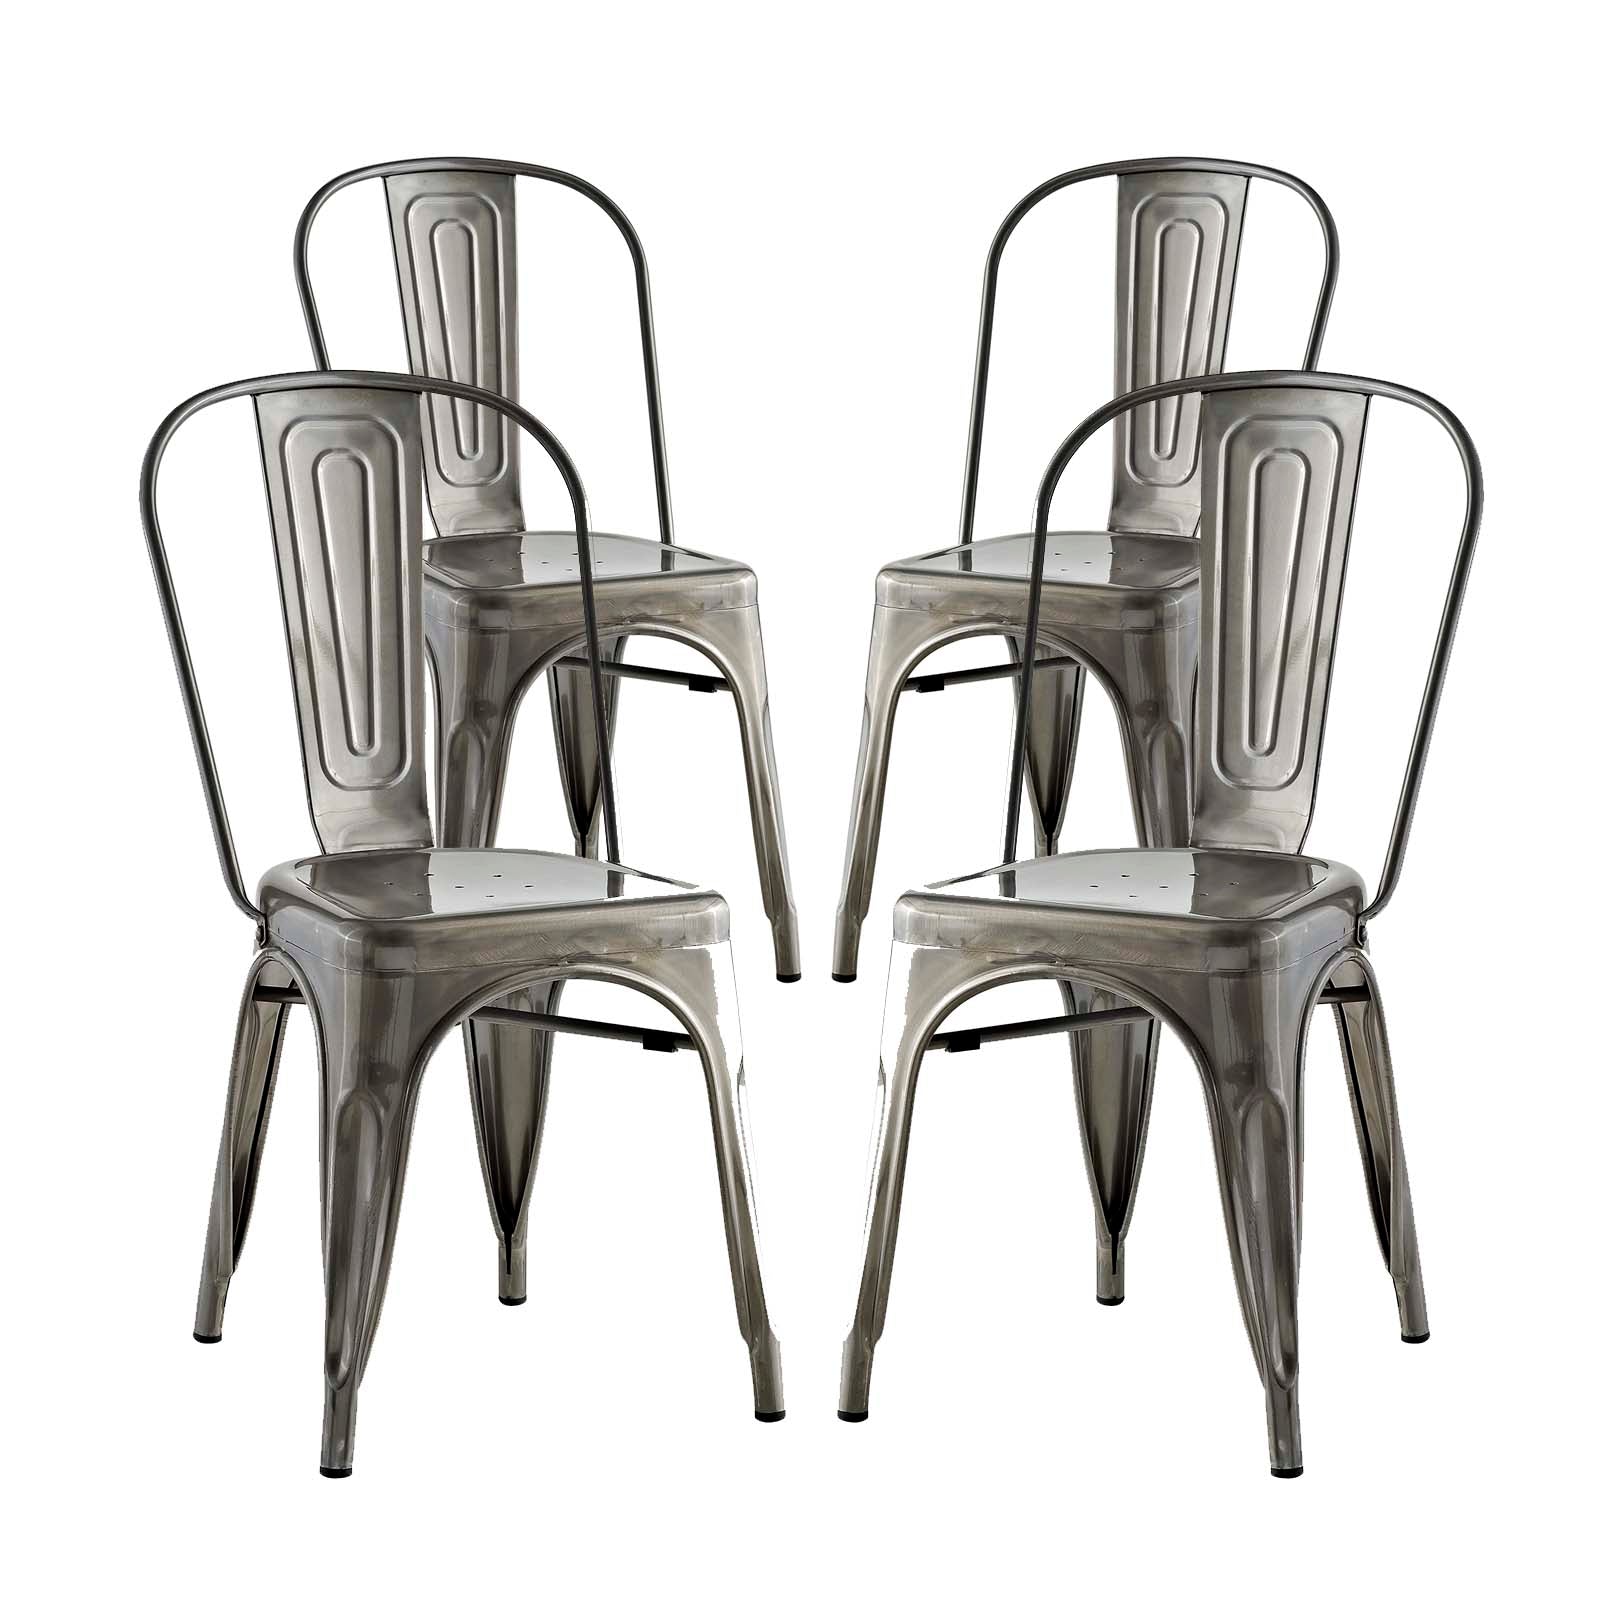 Modway Dining Chairs - Promenade Dining Side Chair Gunmetal (Set of 4)